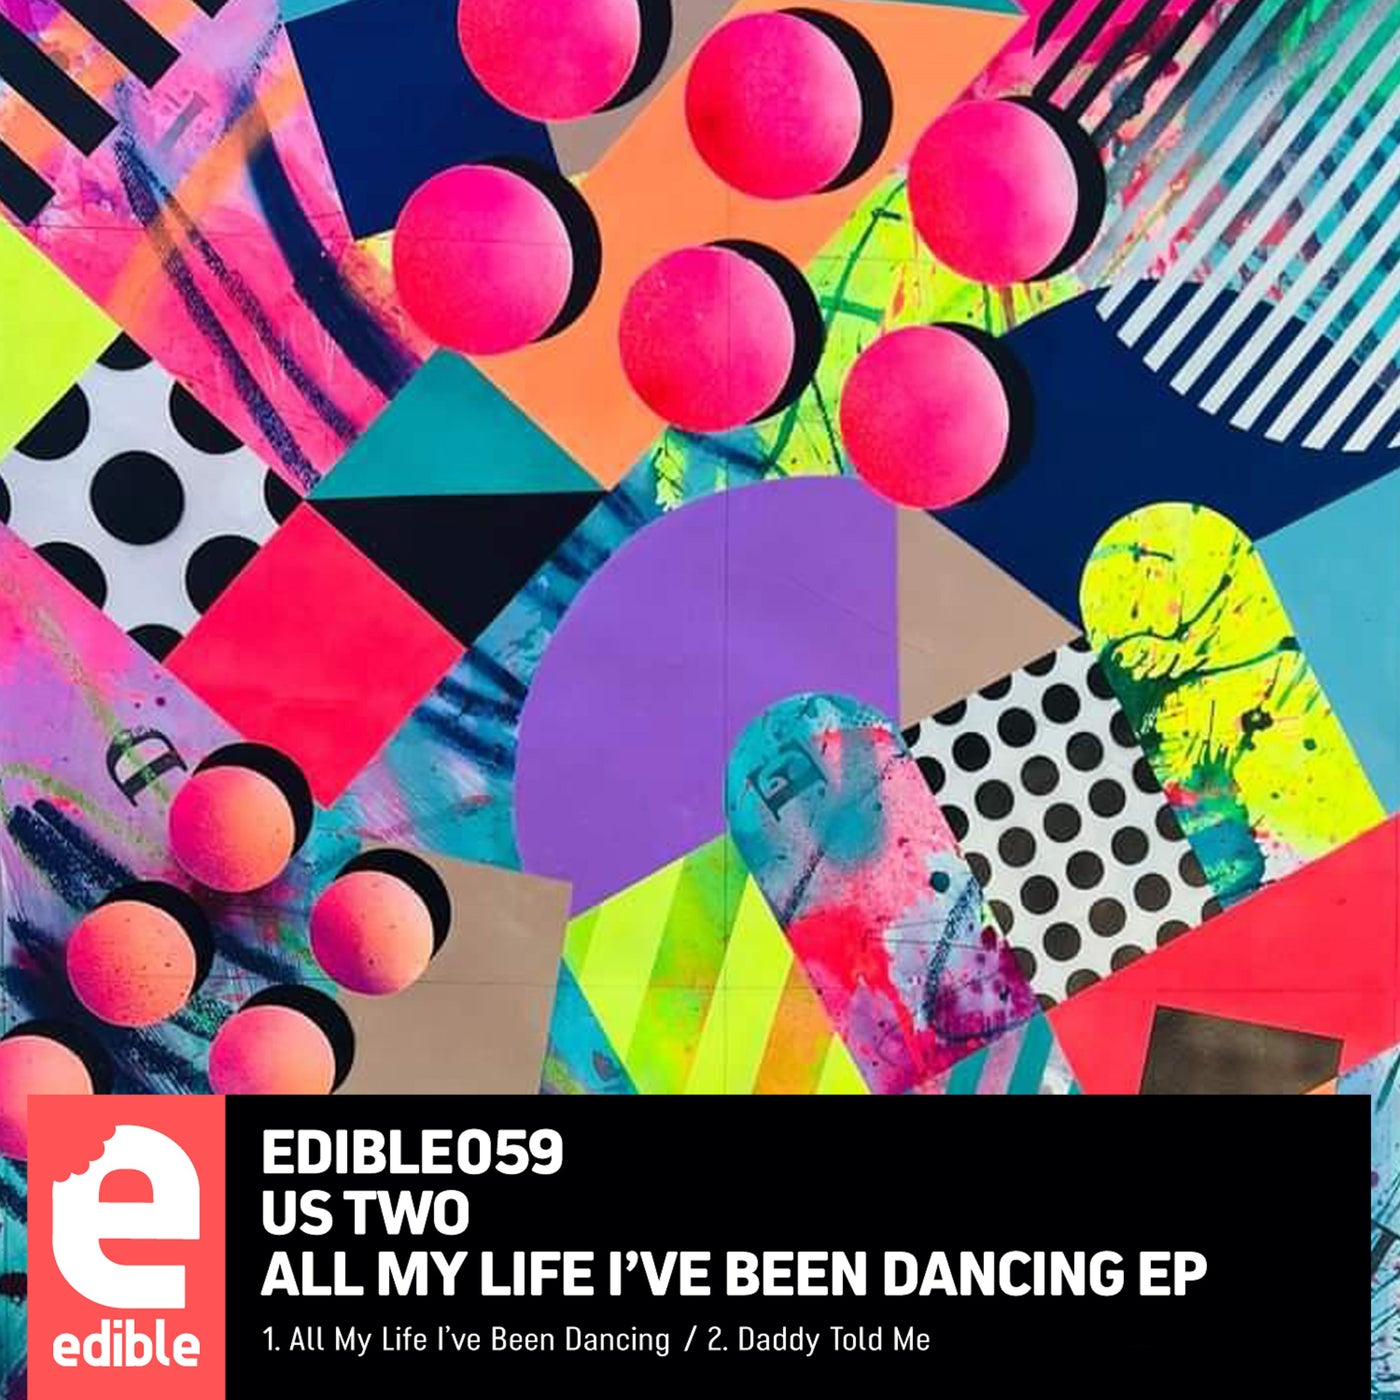 All My Life I've Been Dancing EP